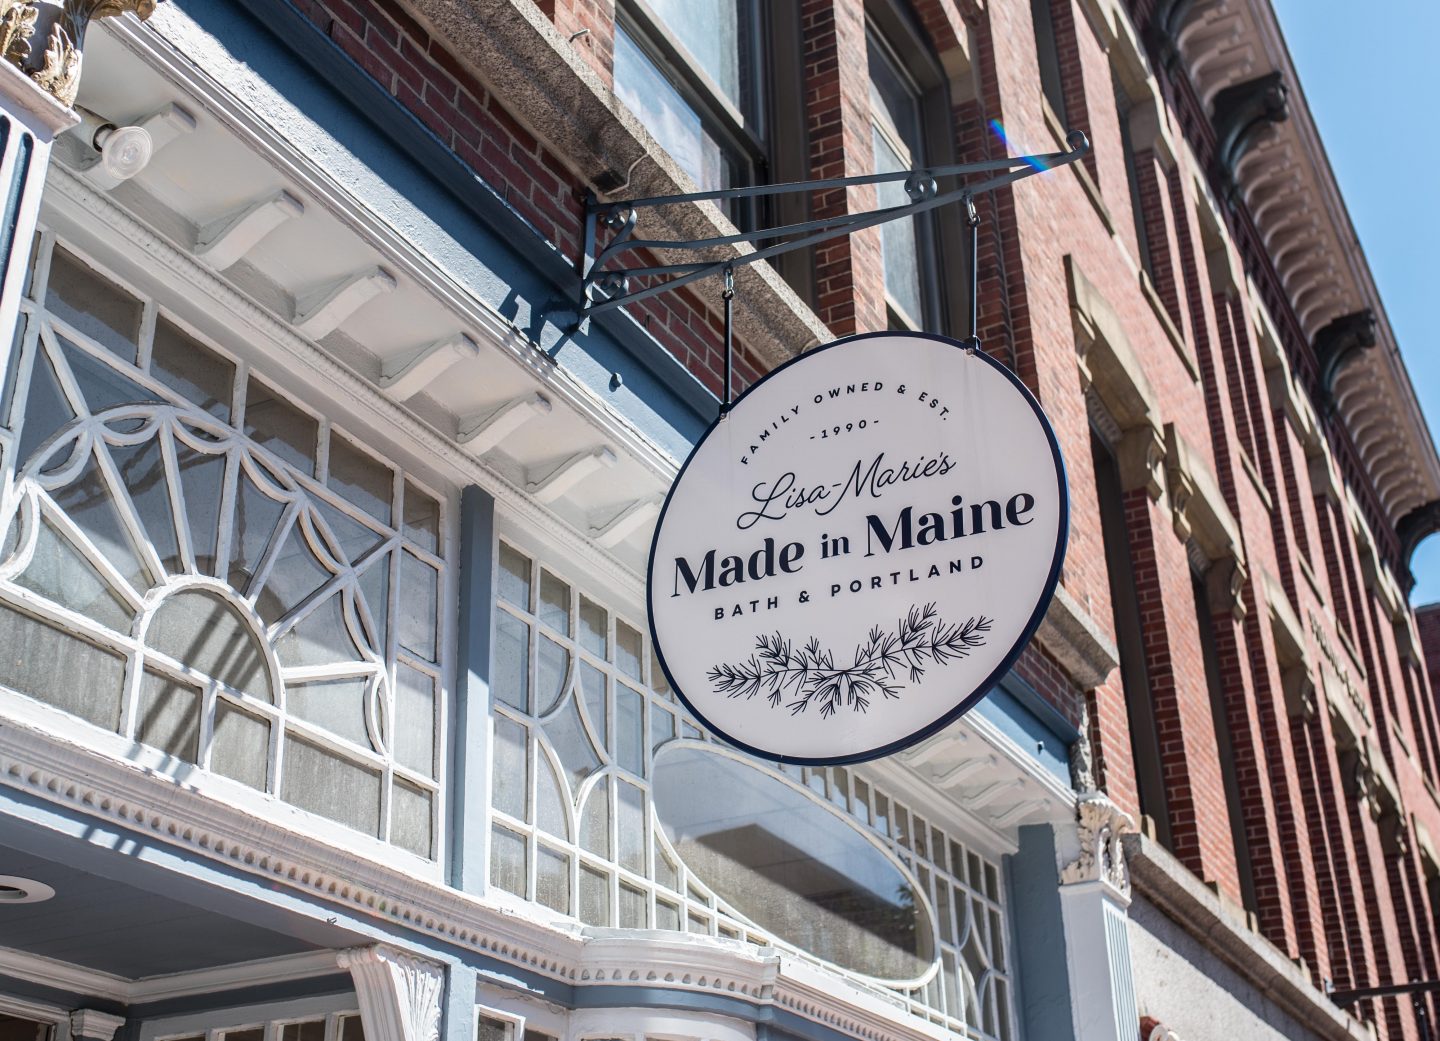 Lisa-Marie's Made in Maine storefront